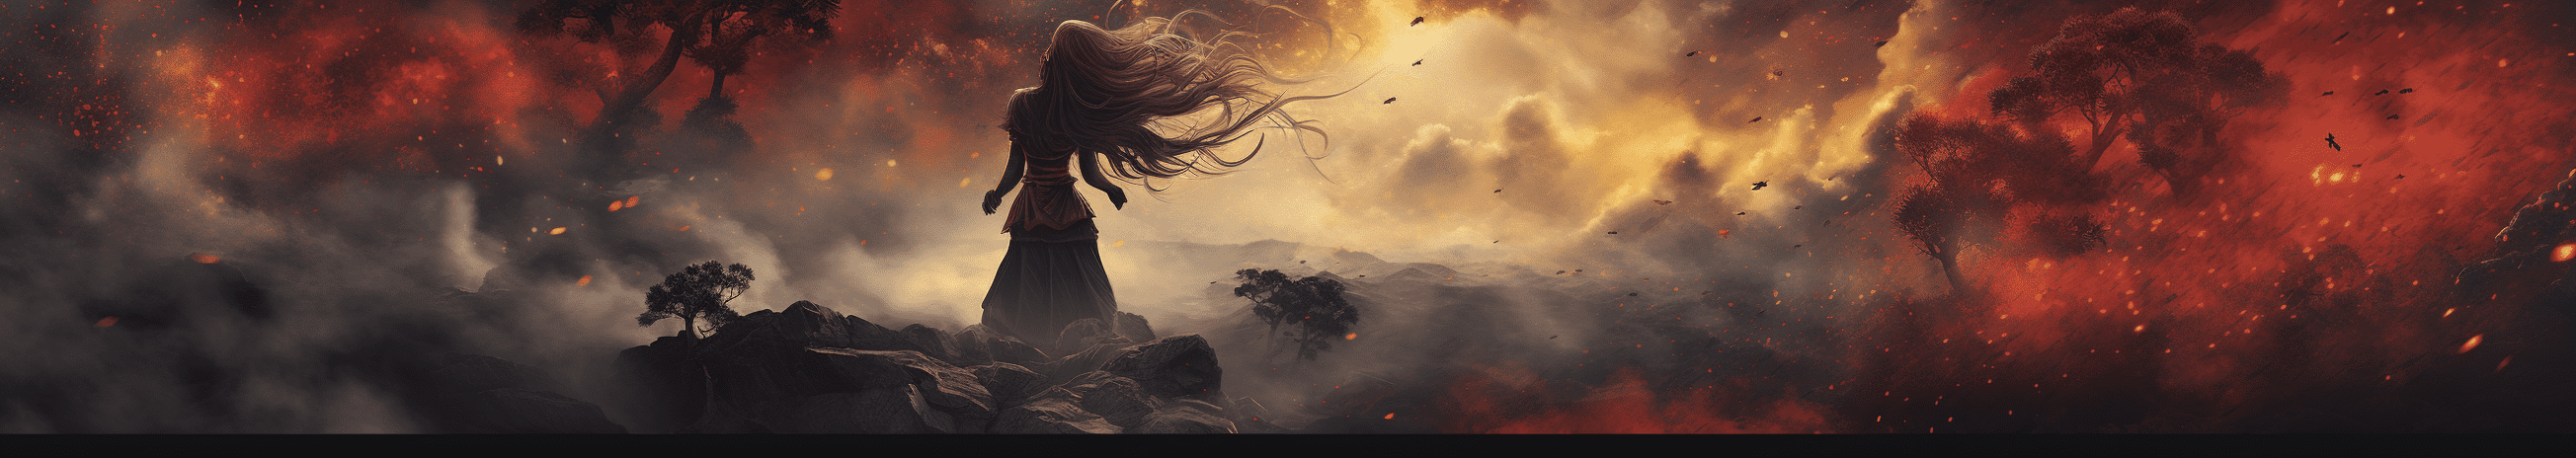 Fantasy banner image of a woman staring off into the horizon.